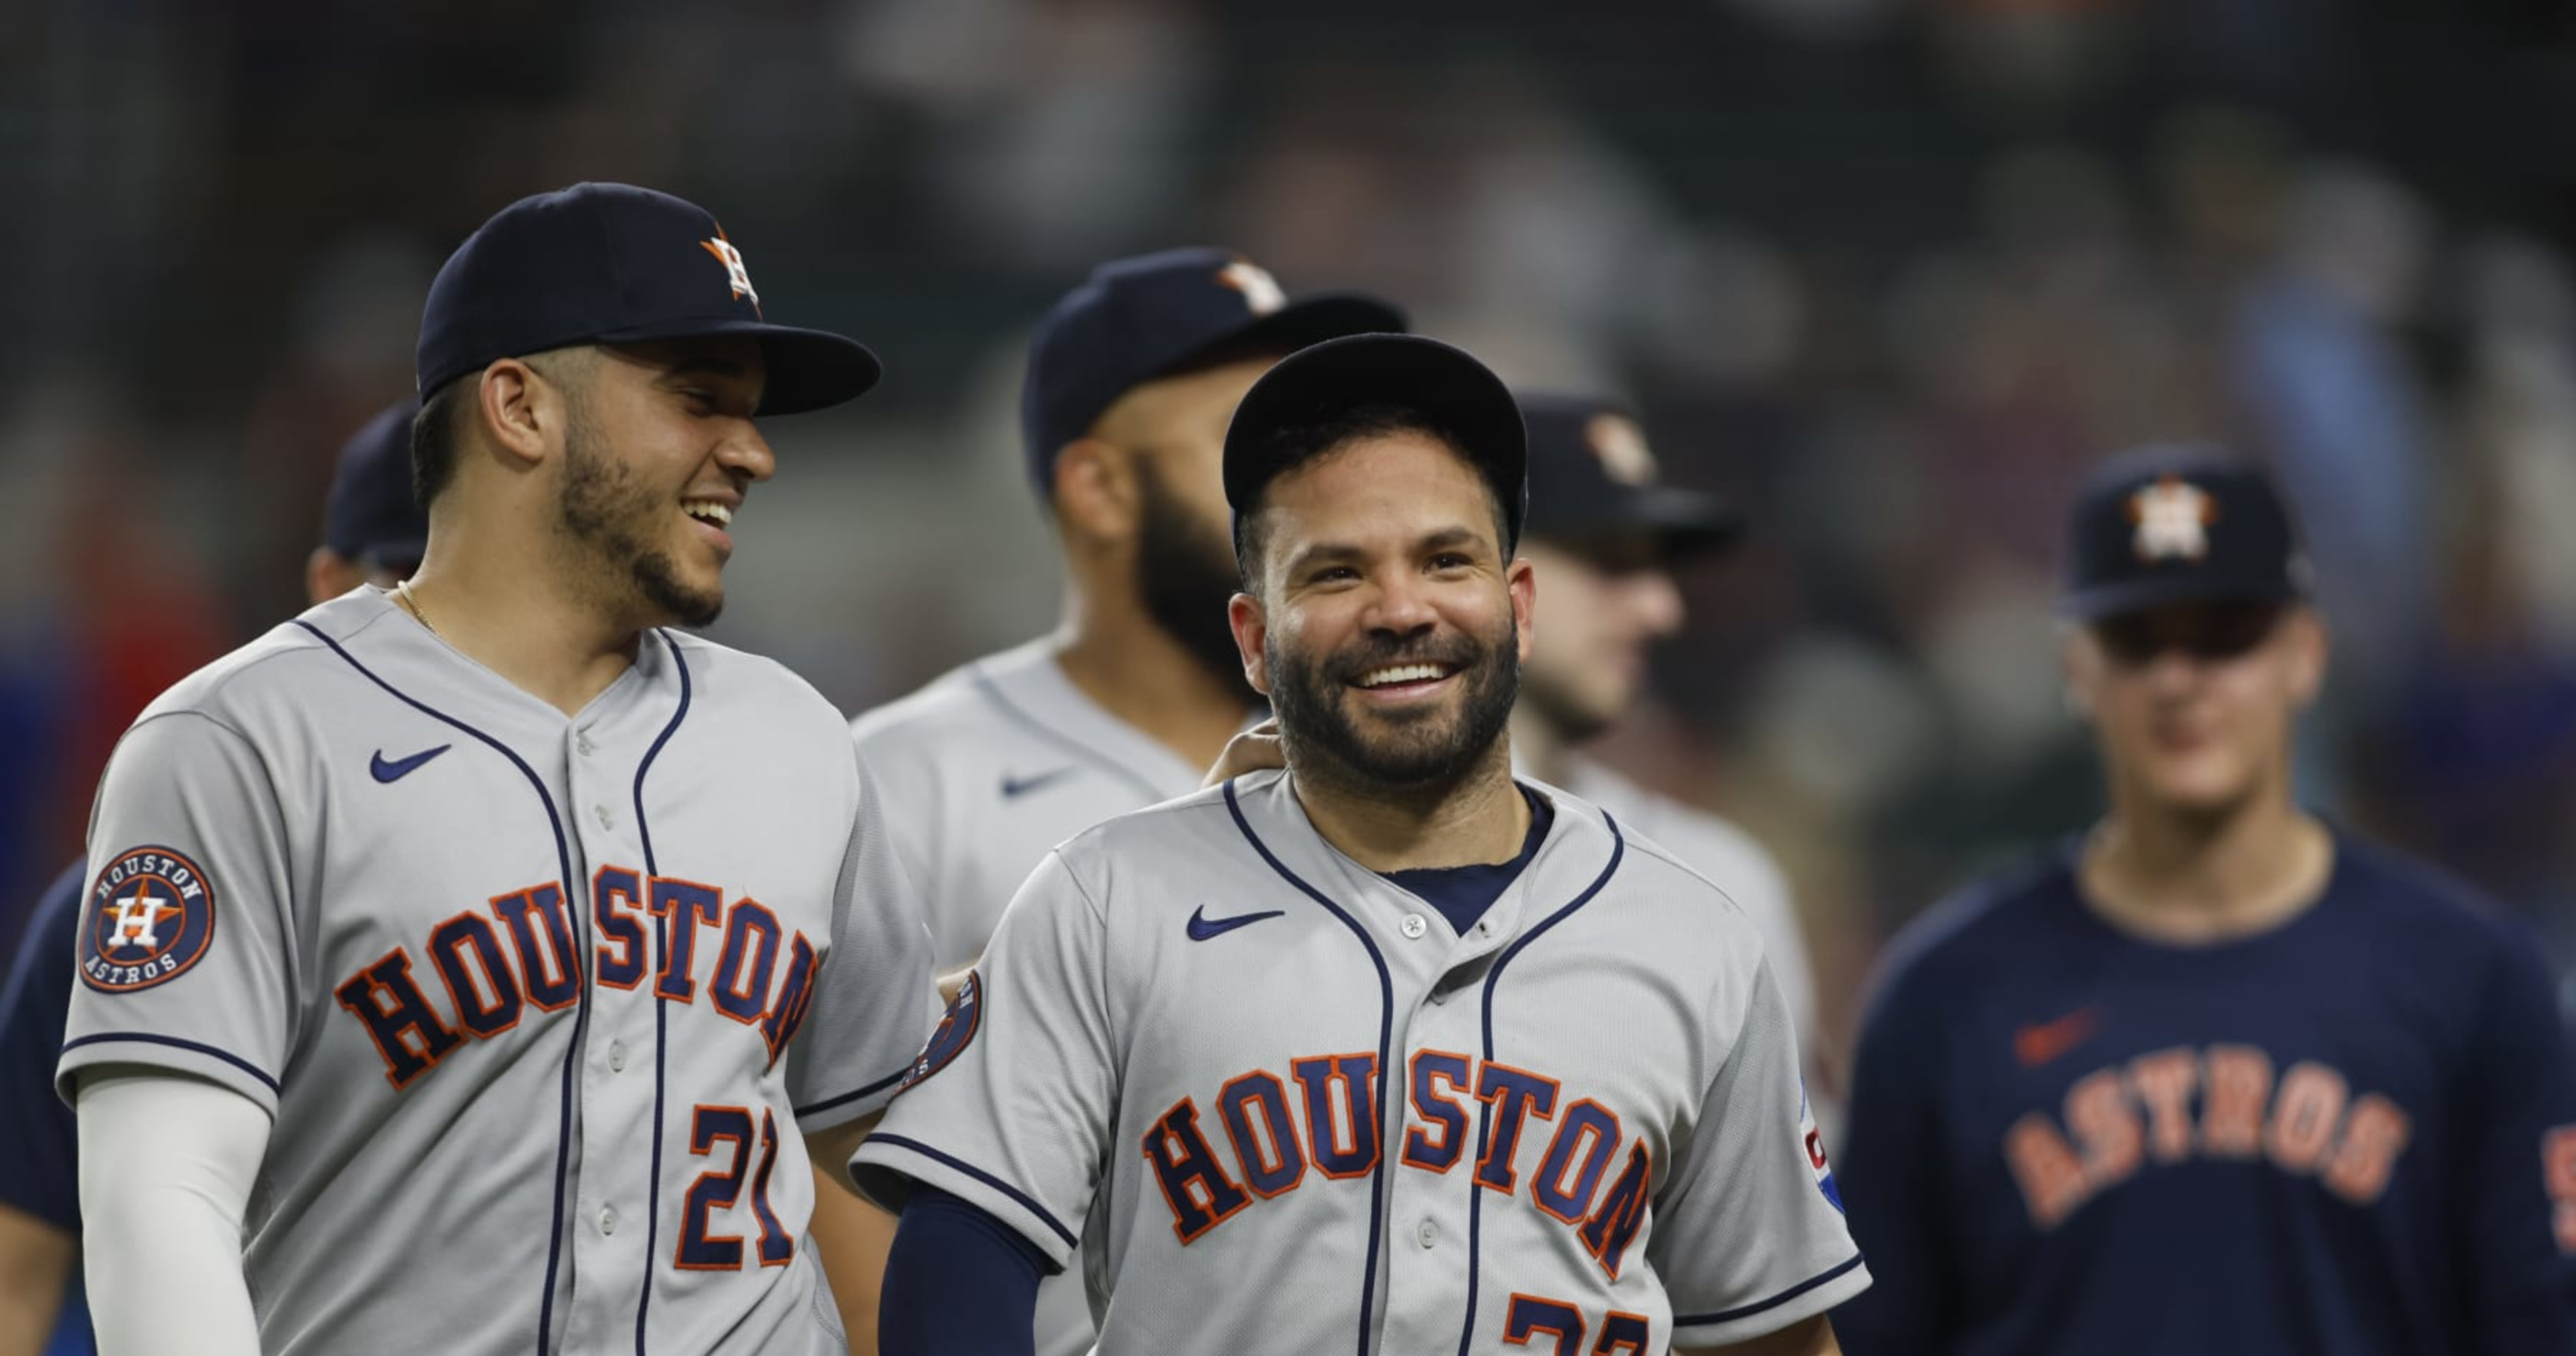 Houston Astros on X: The Houston Astros are headed to the World